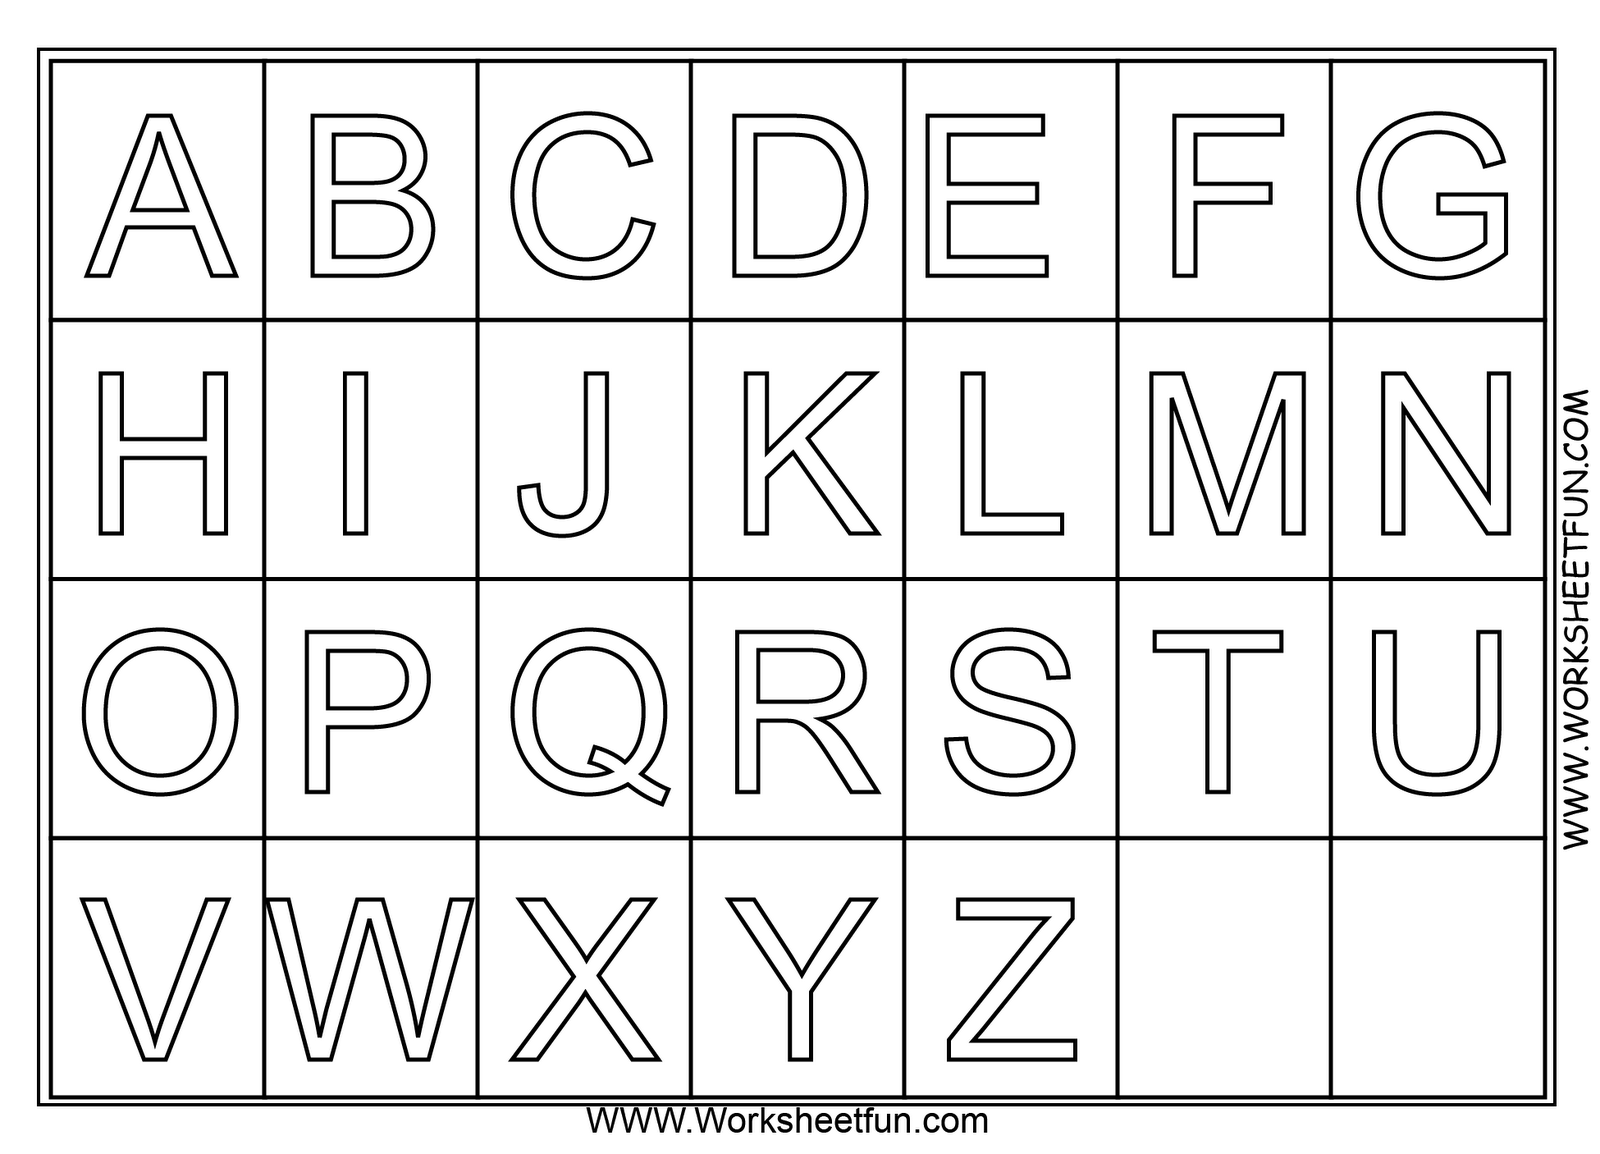 Letters-Coloring-Worksheets-Preschool_351293 (1600×1154 with A-Z Alphabet Worksheets